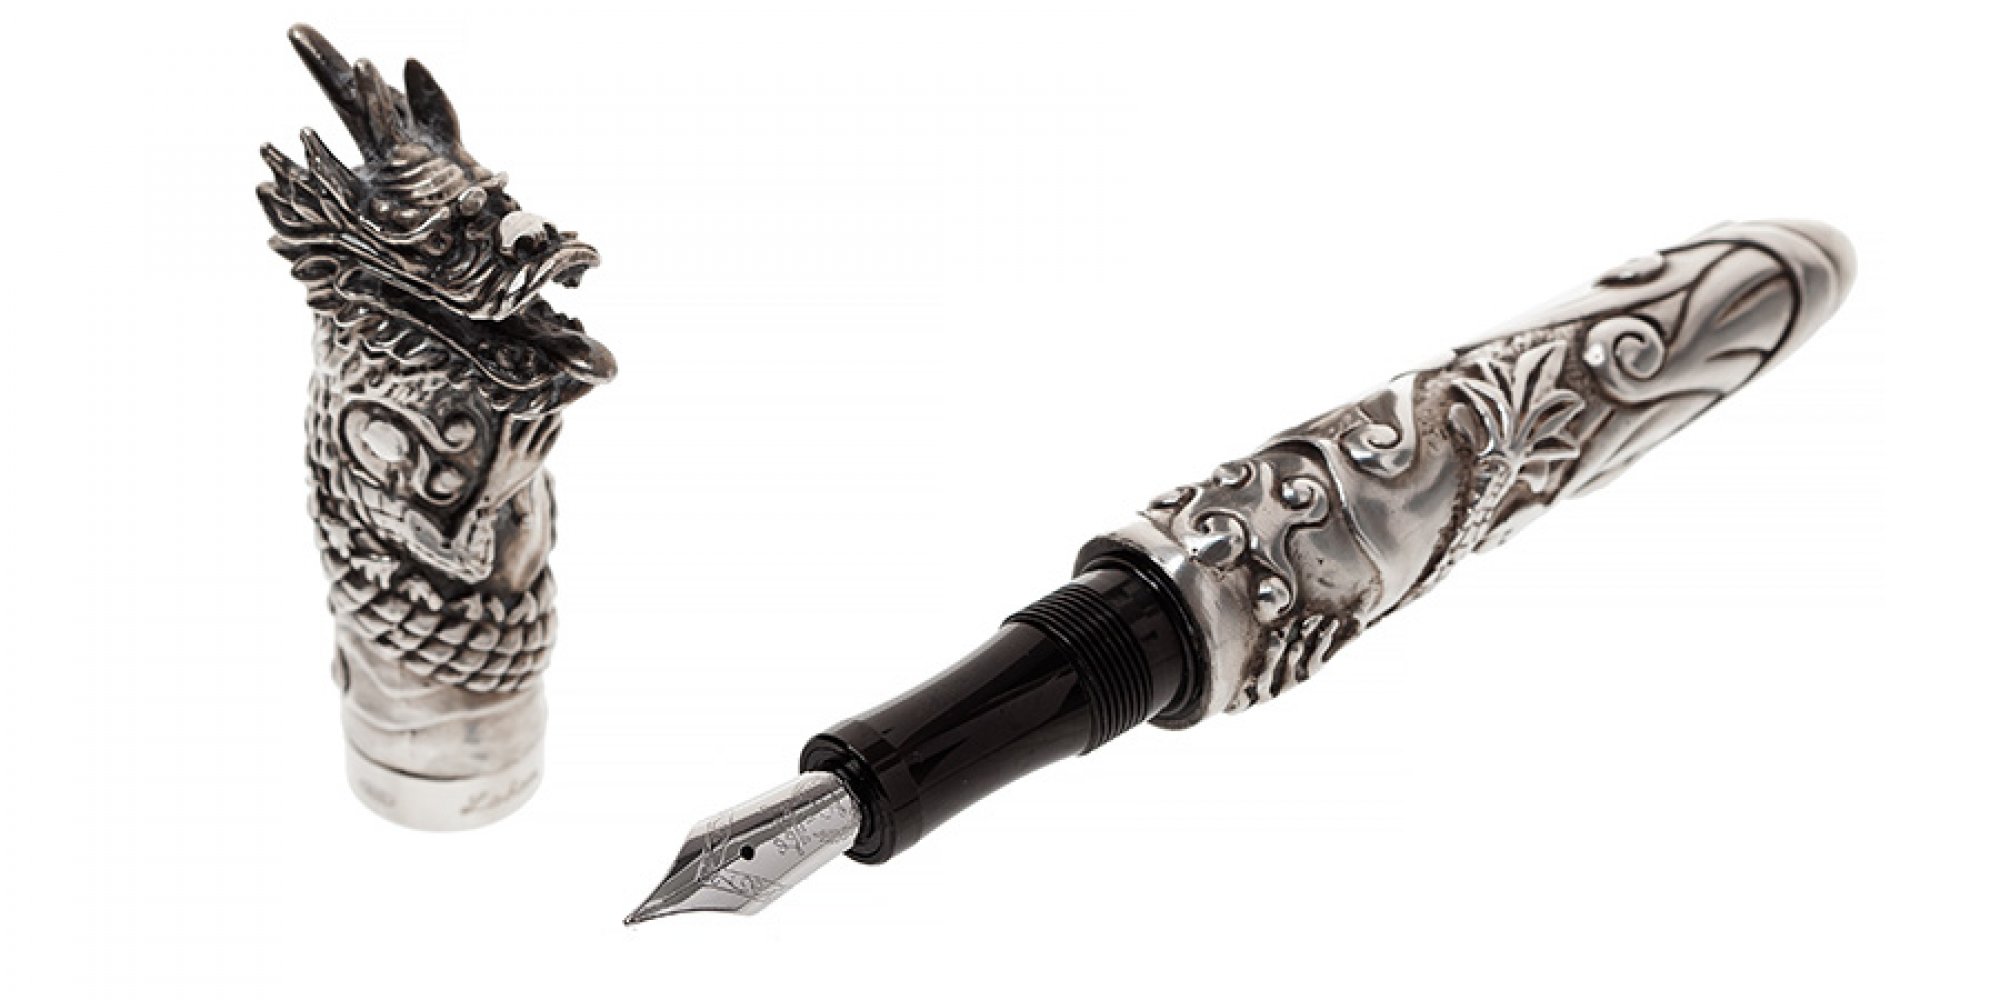 LABAN FOUNTAIN PEN.Barrel and cap in 925 sterling silver.Limited edition 64/800.Silver-plated nib, - Image 2 of 5